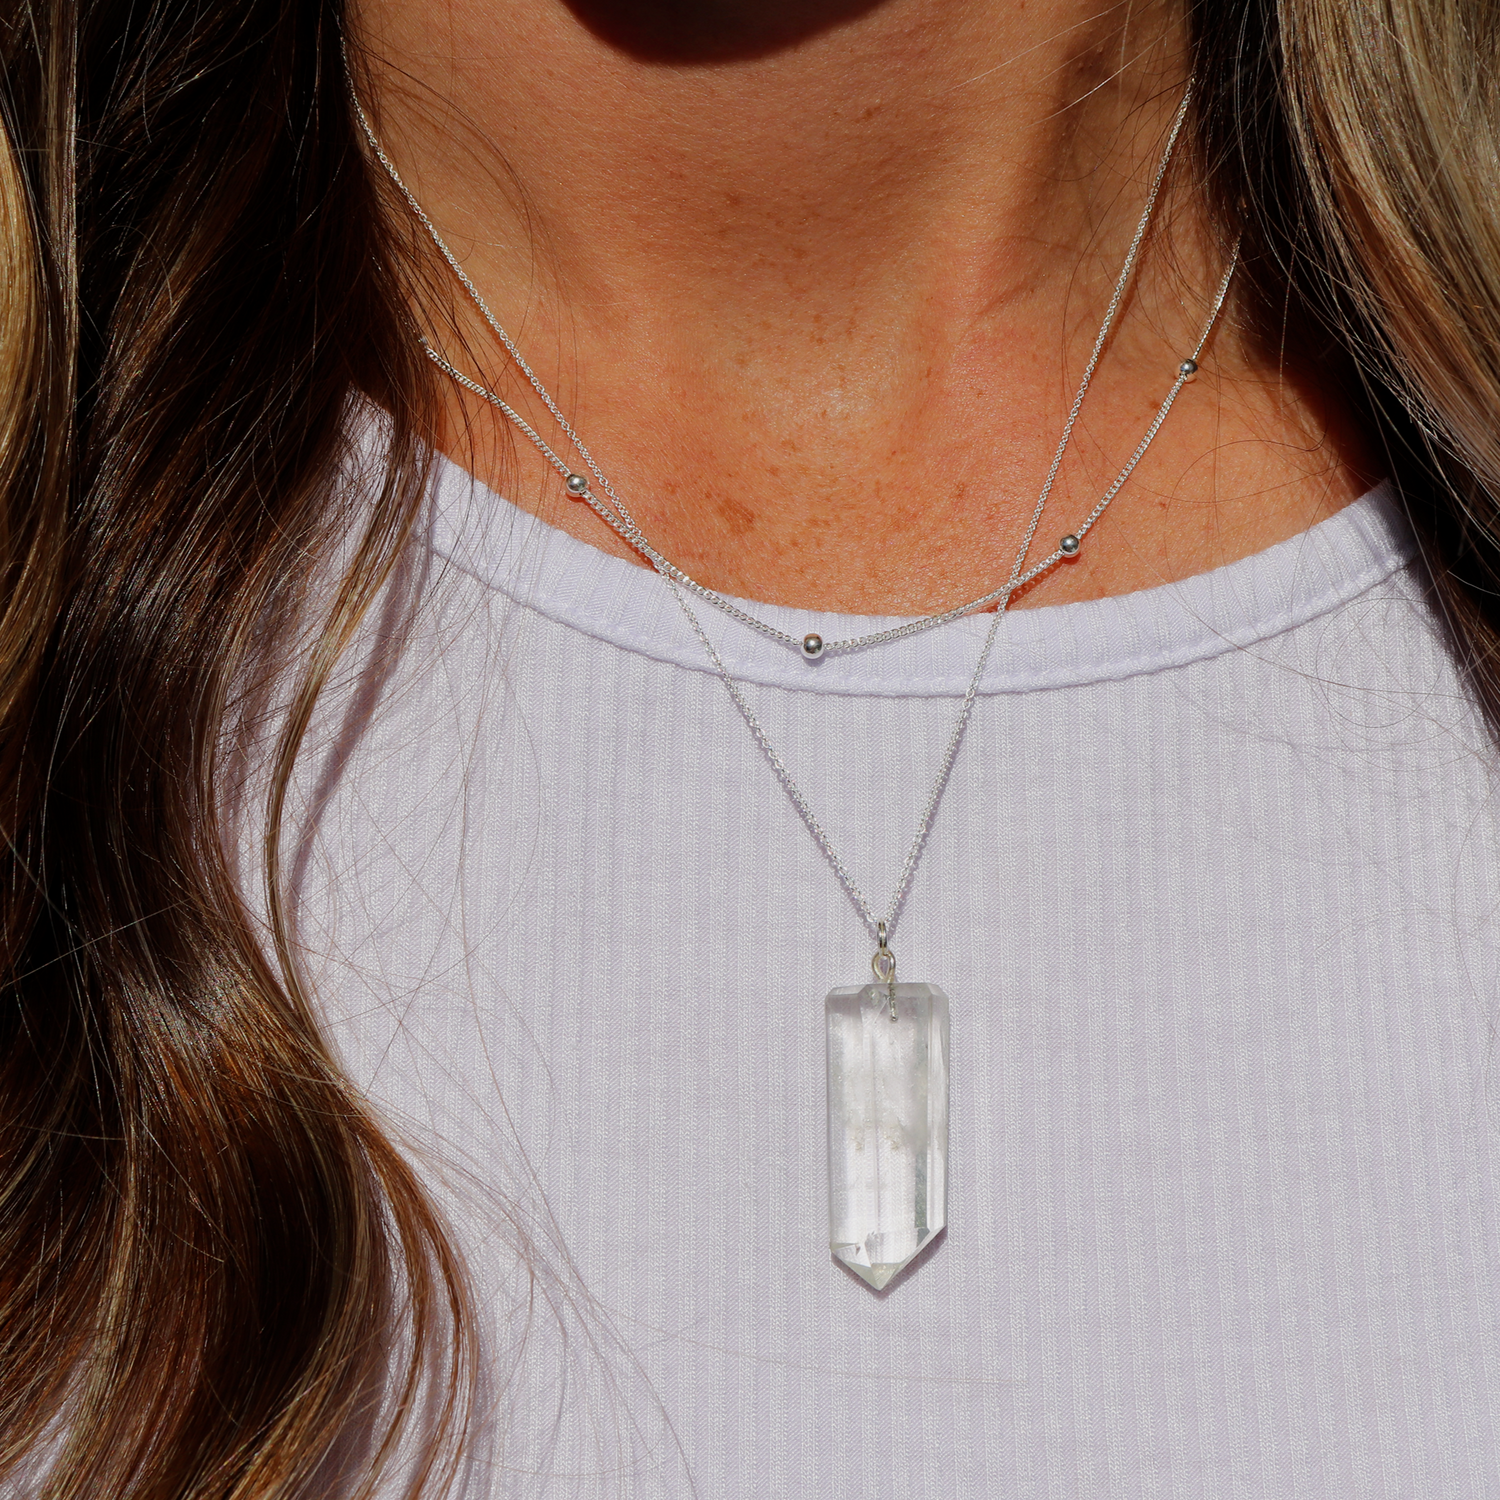 Stacey Crystals - Beautiful clear quartz crystal necklace ❤️☀️🧚🏻 **Clear  Quartz is the most popular and versatile healing stone of all the crystals.  It is the most powerful healing stone thought to